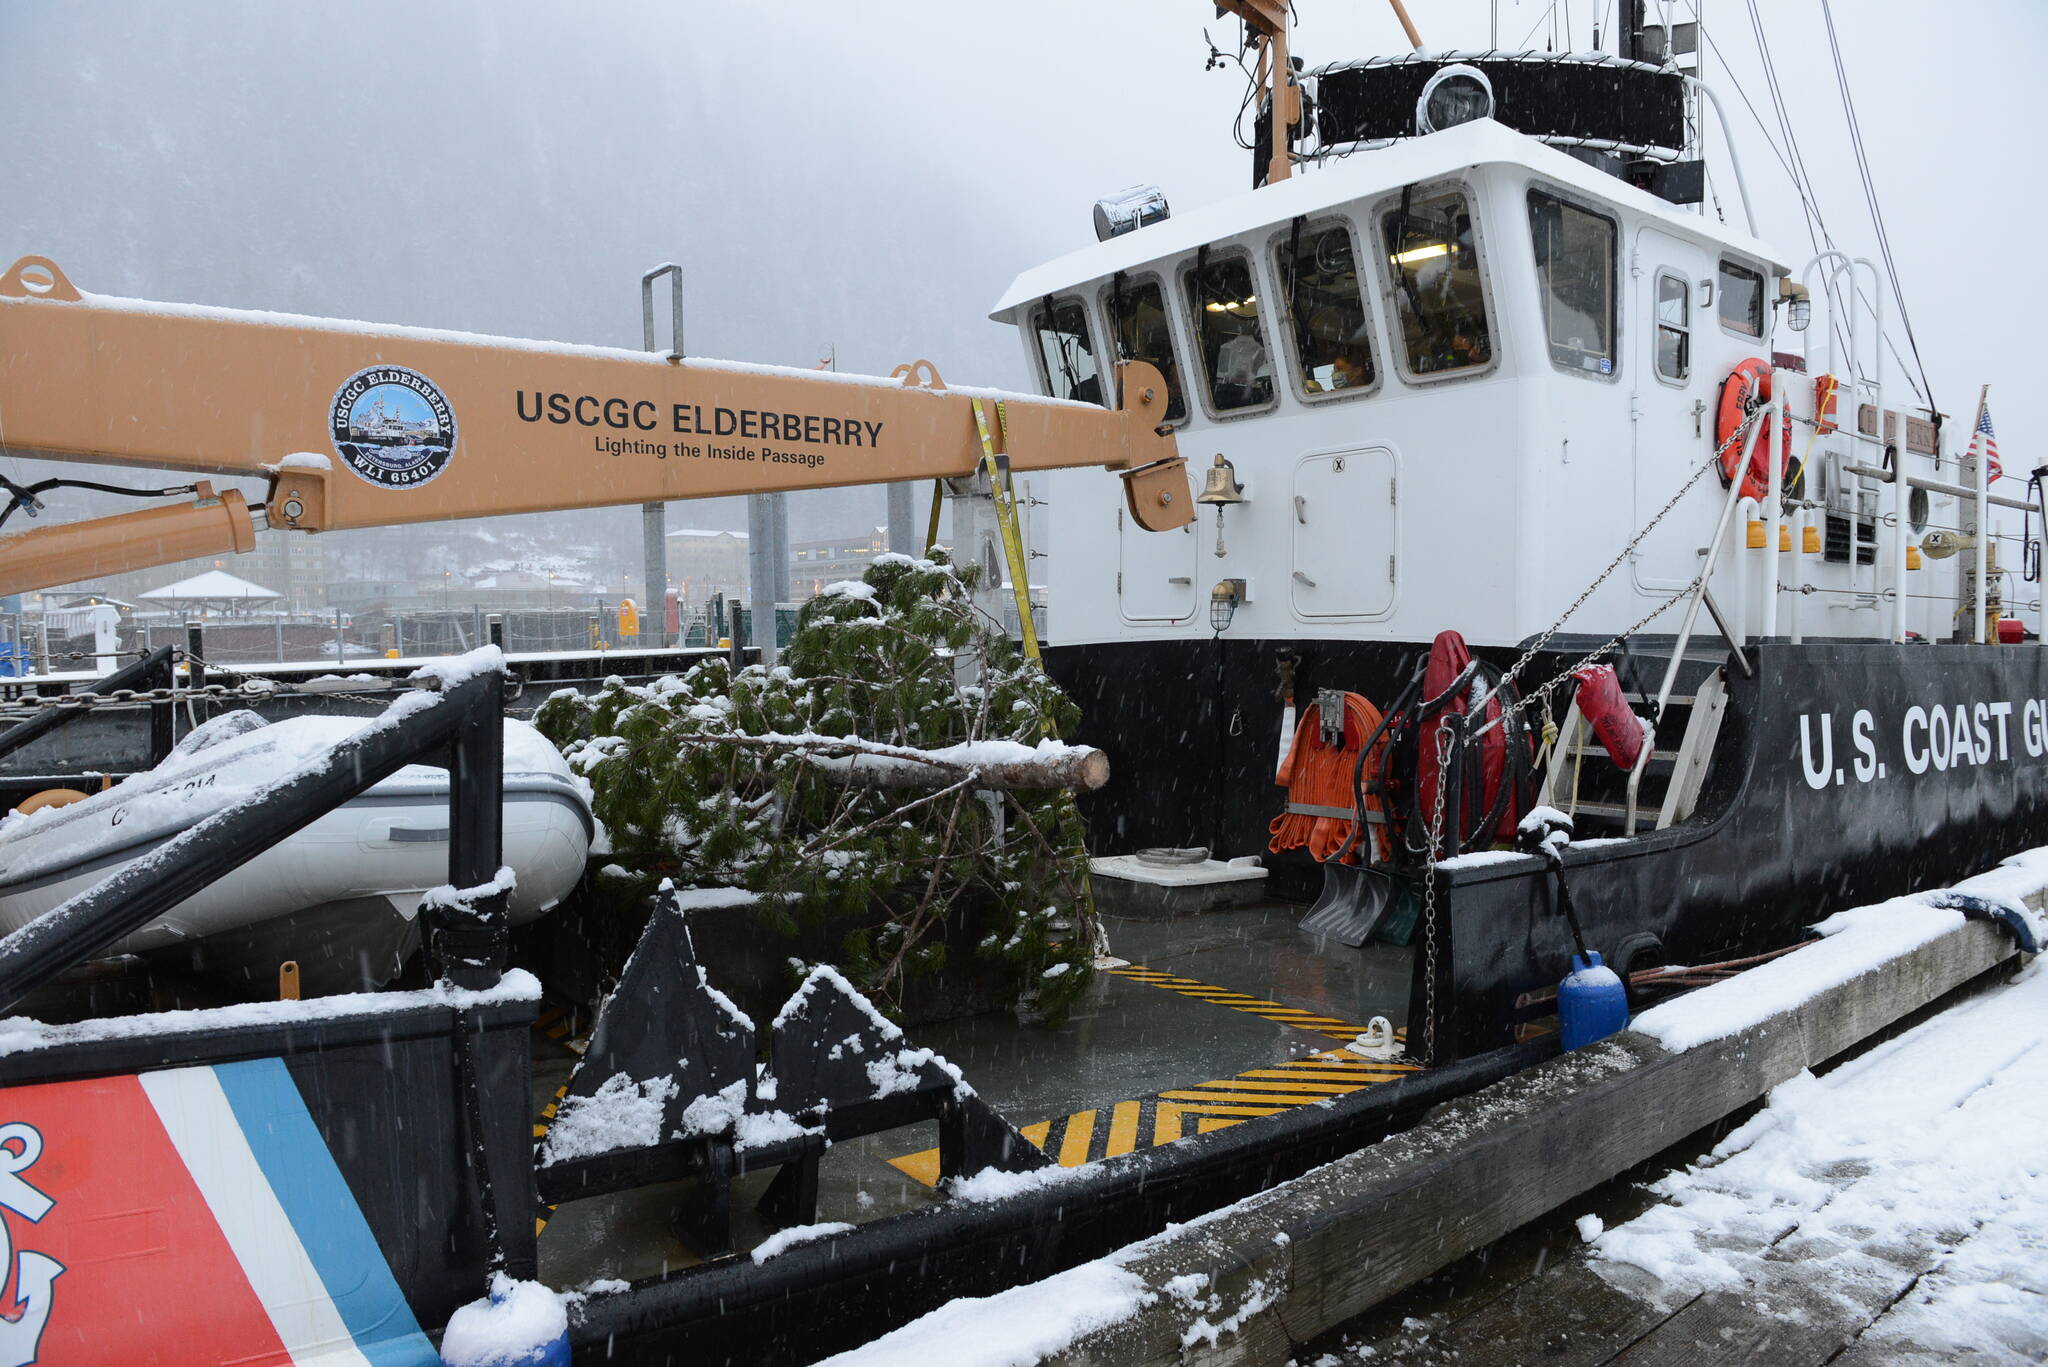 U.S. Coast Guard Cutter Elderberry carried the Together Tree, bound for the Alaska Governor’s Mansion, up from Wrangell where it was harvested after a brief delay due to some mechanical issues. (USCG photo / Petty Officer 2nd Class Lexie Preston)